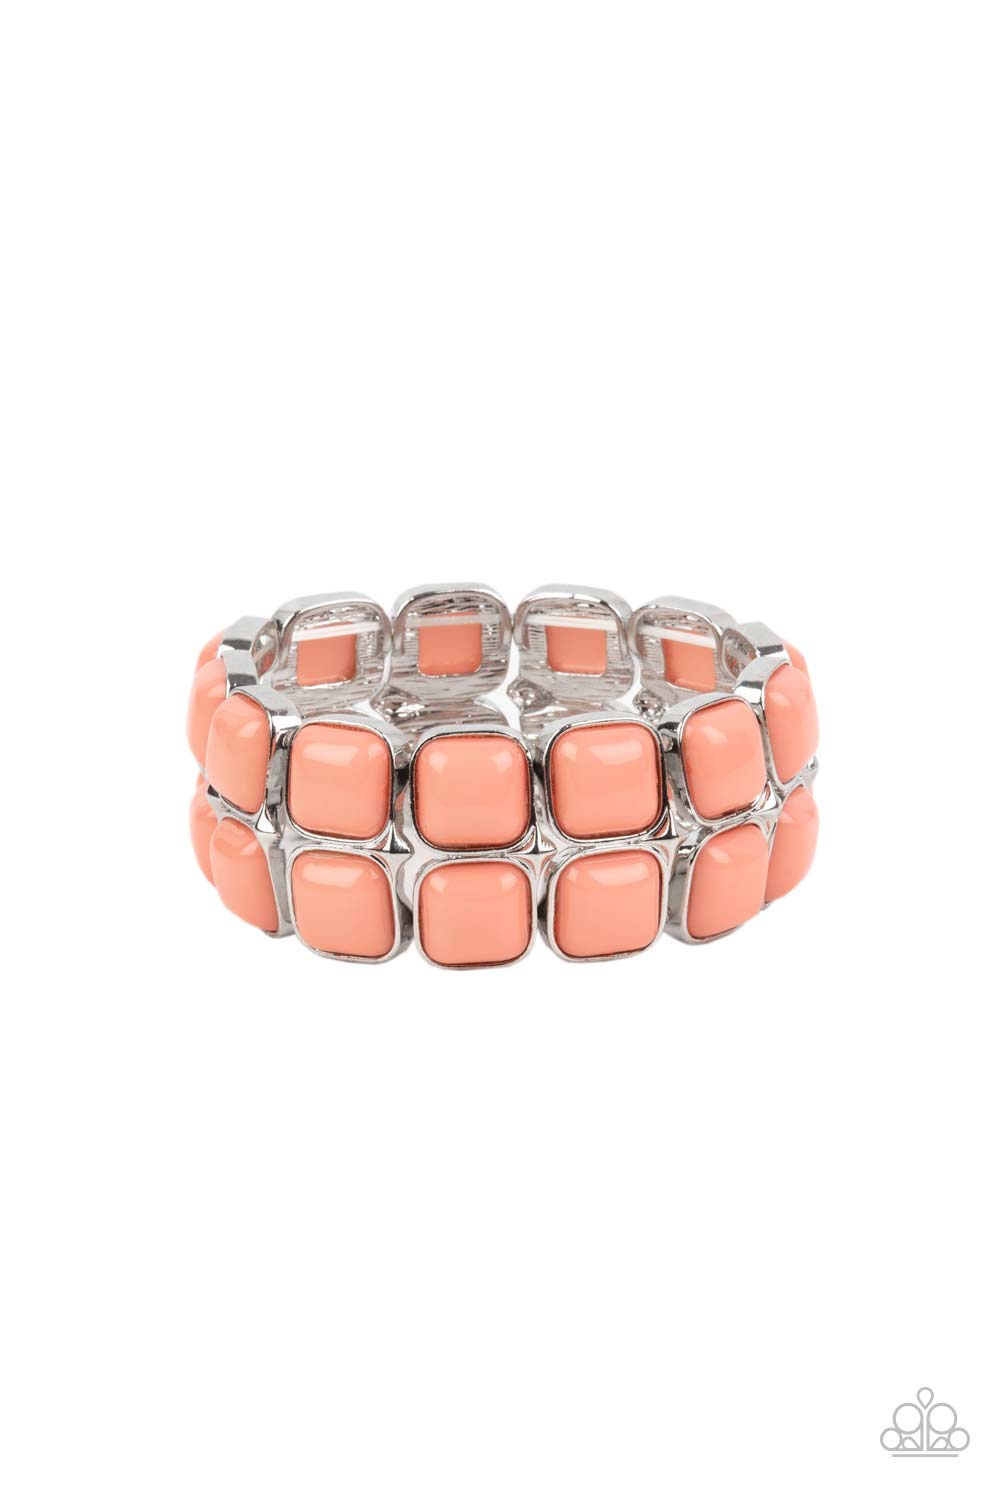 Double The DIVA-ttitude Coral Orange Bracelet - Paparazzi Accessories Spring Exclusive- lightbox - CarasShop.com - $5 Jewelry by Cara Jewels